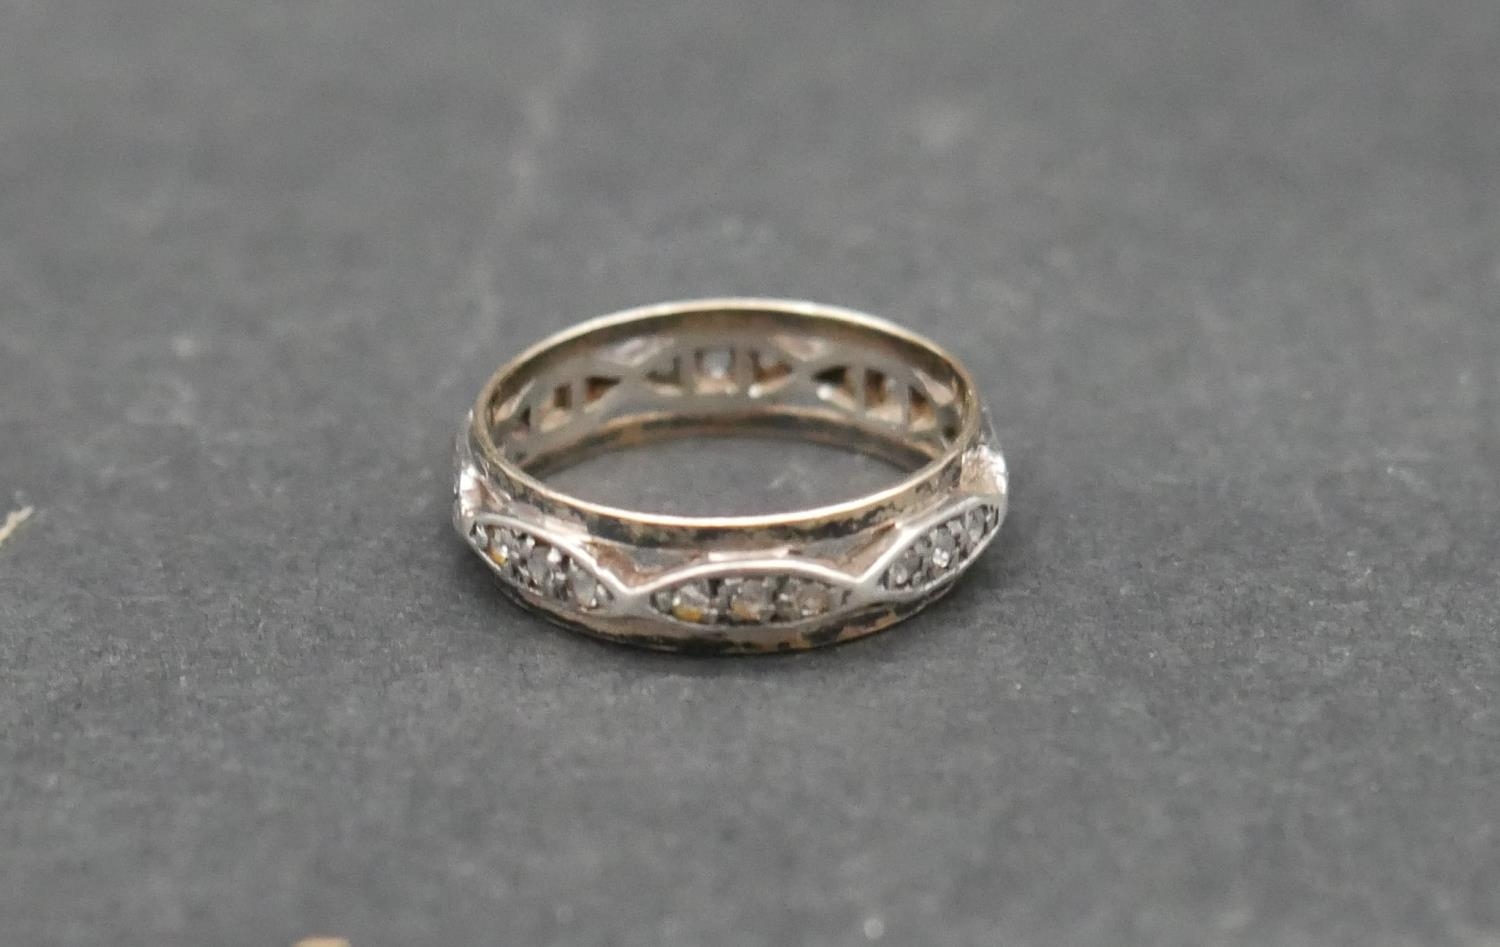 An antique white metal and yellow metal eternity band set with hand cut white stones. With shaped